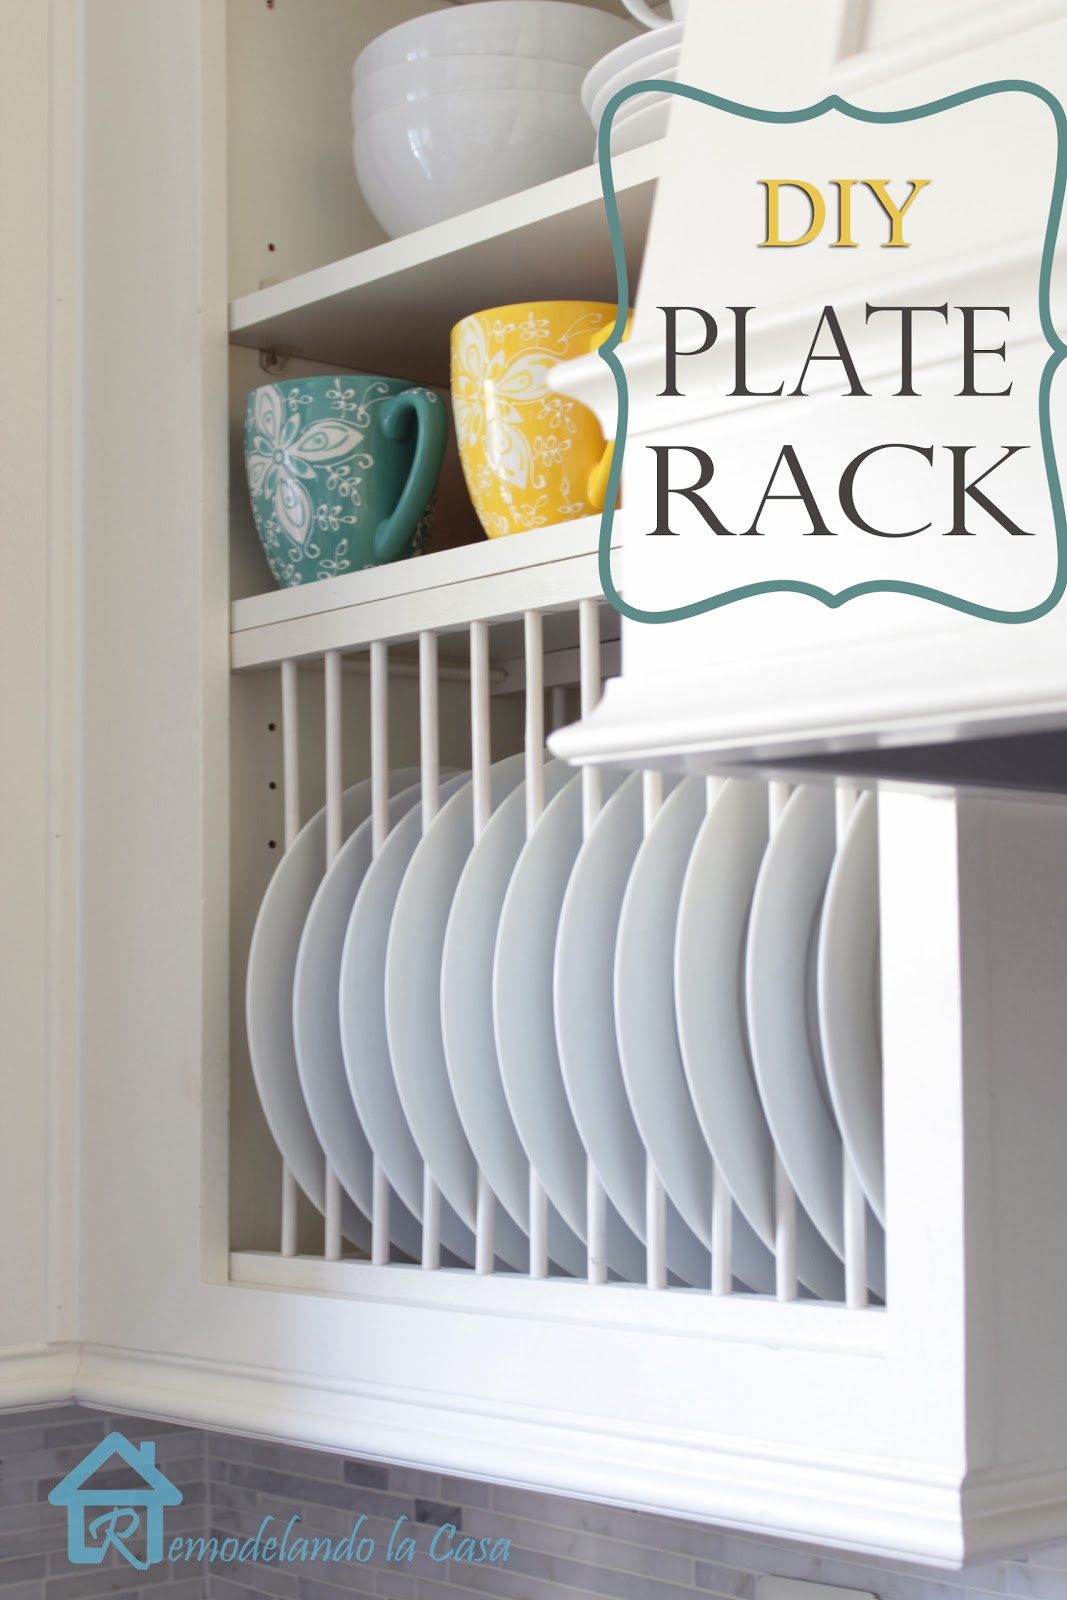 regular cabinet is giving a plate rack with round and square dowels